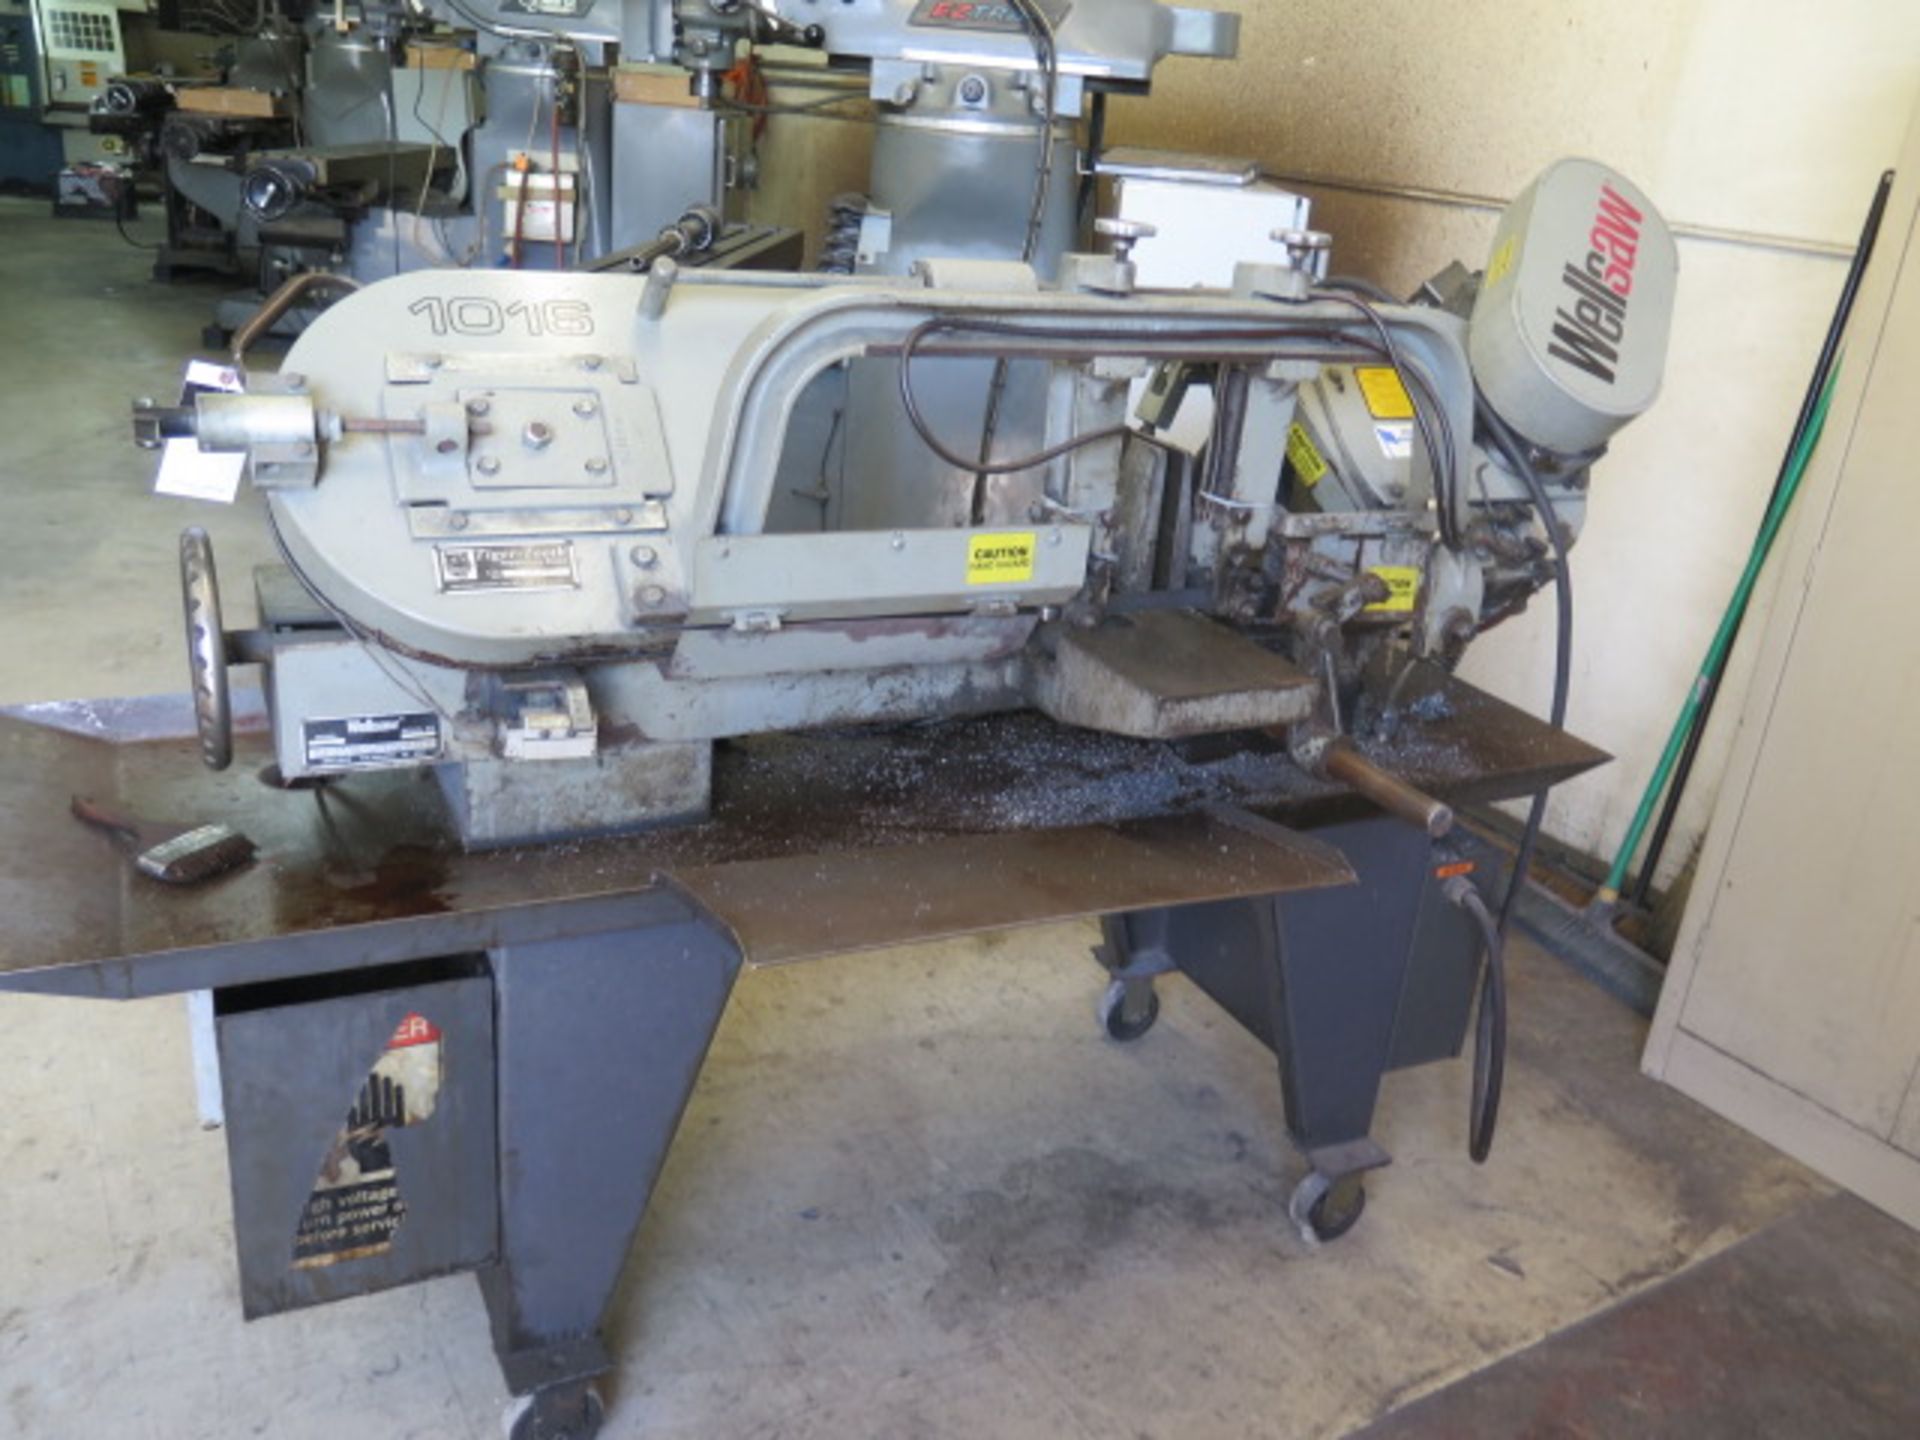 Wellsaw mdl. 1016 10” Horizontal Band Saw s/n 8309 w/ Manual Clamping, Work Stop, Coolant SOLD AS-IS